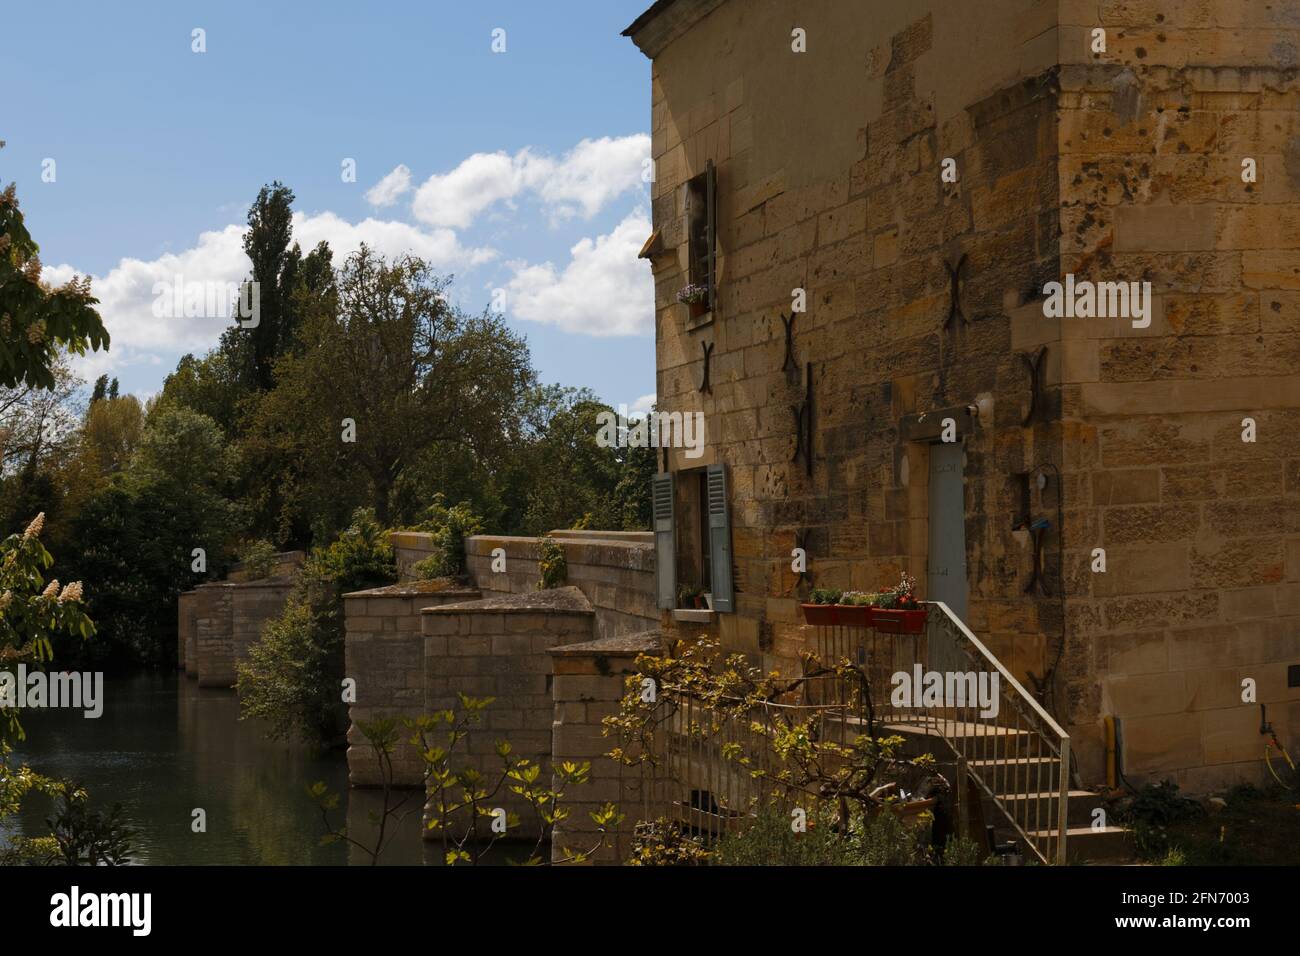 The ferryman's house and the old bridge of Limay, Yvelines, France Stock Photo